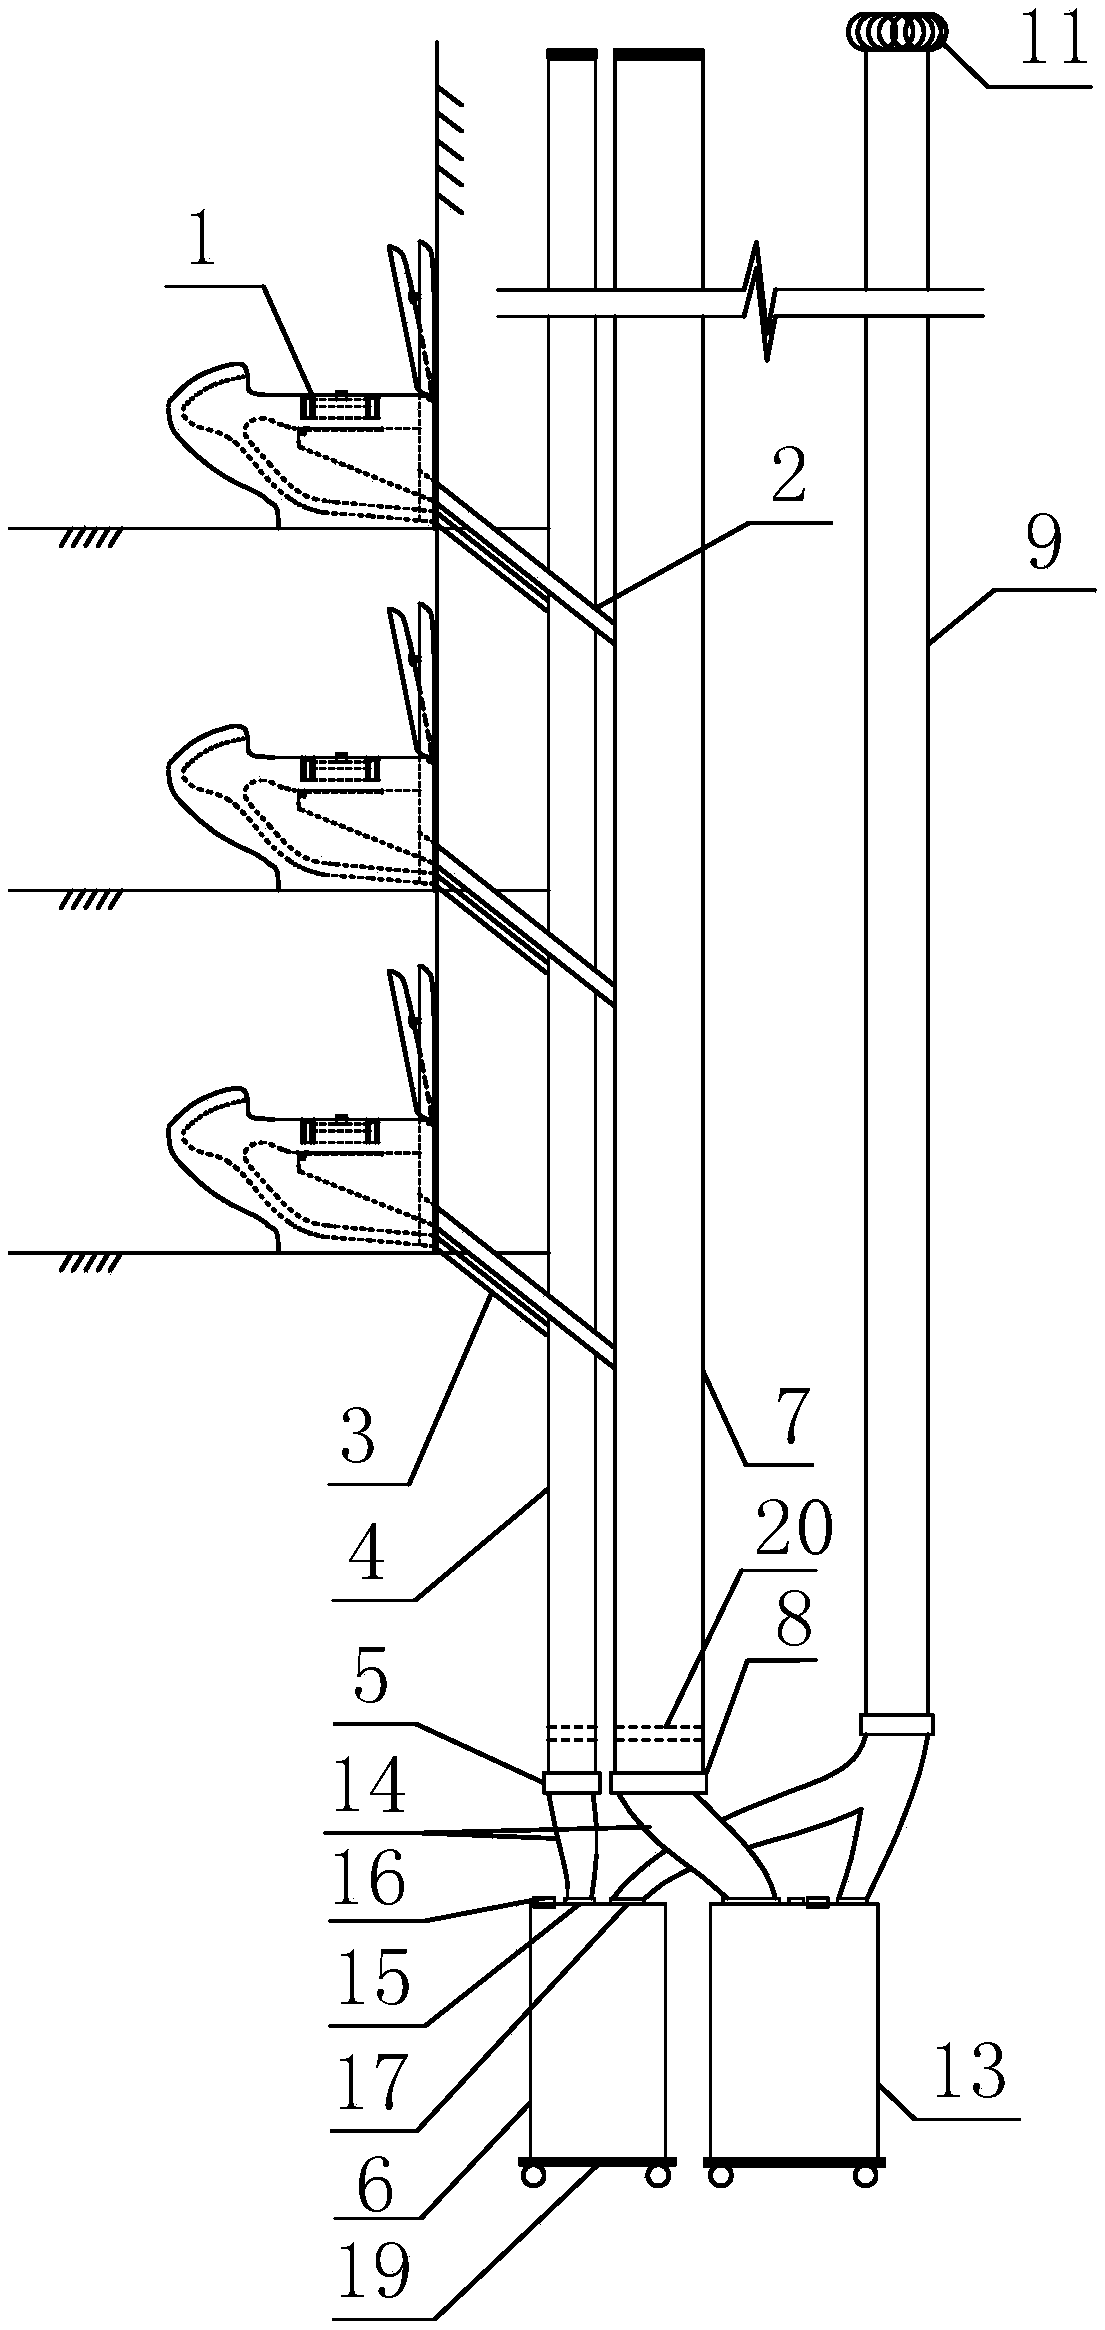 Building water-free excrement and urine separation collection and resource utilization system